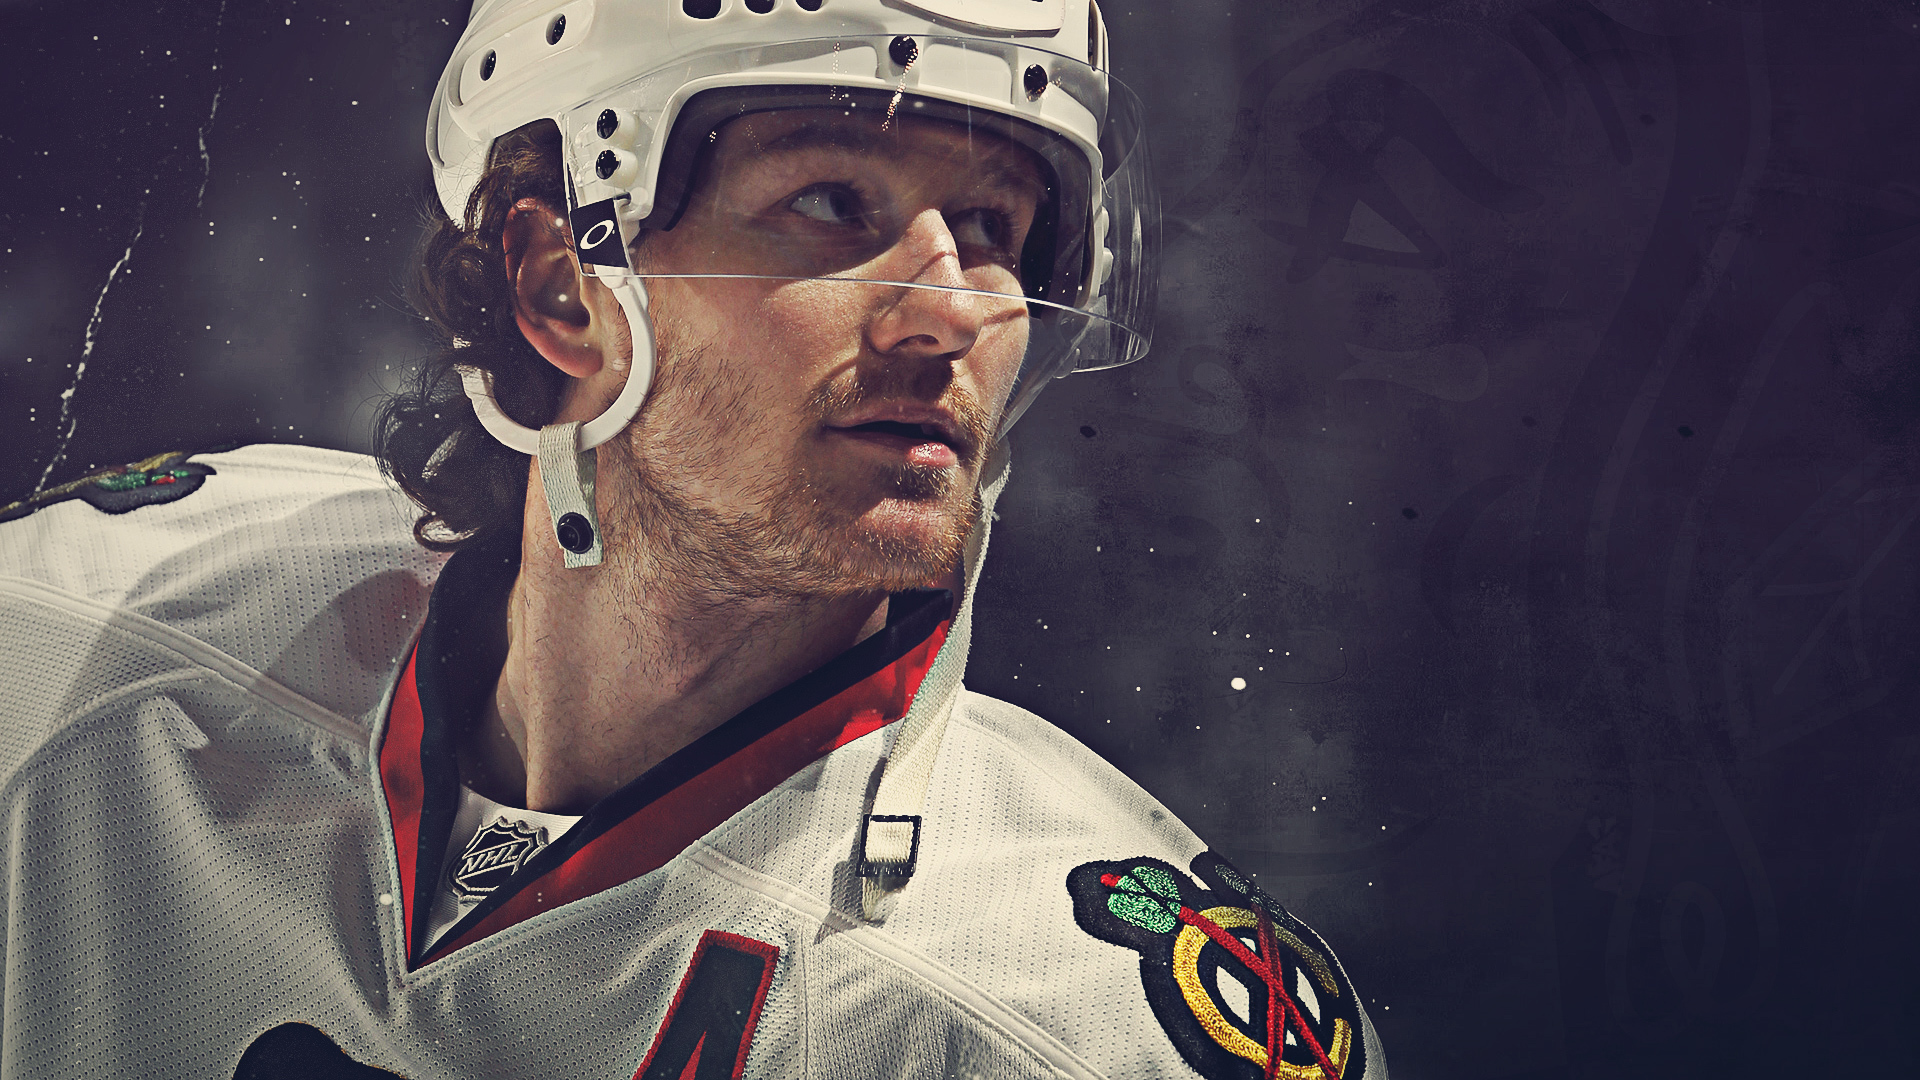 Duncan Keith On Ice Wallpaper And Image